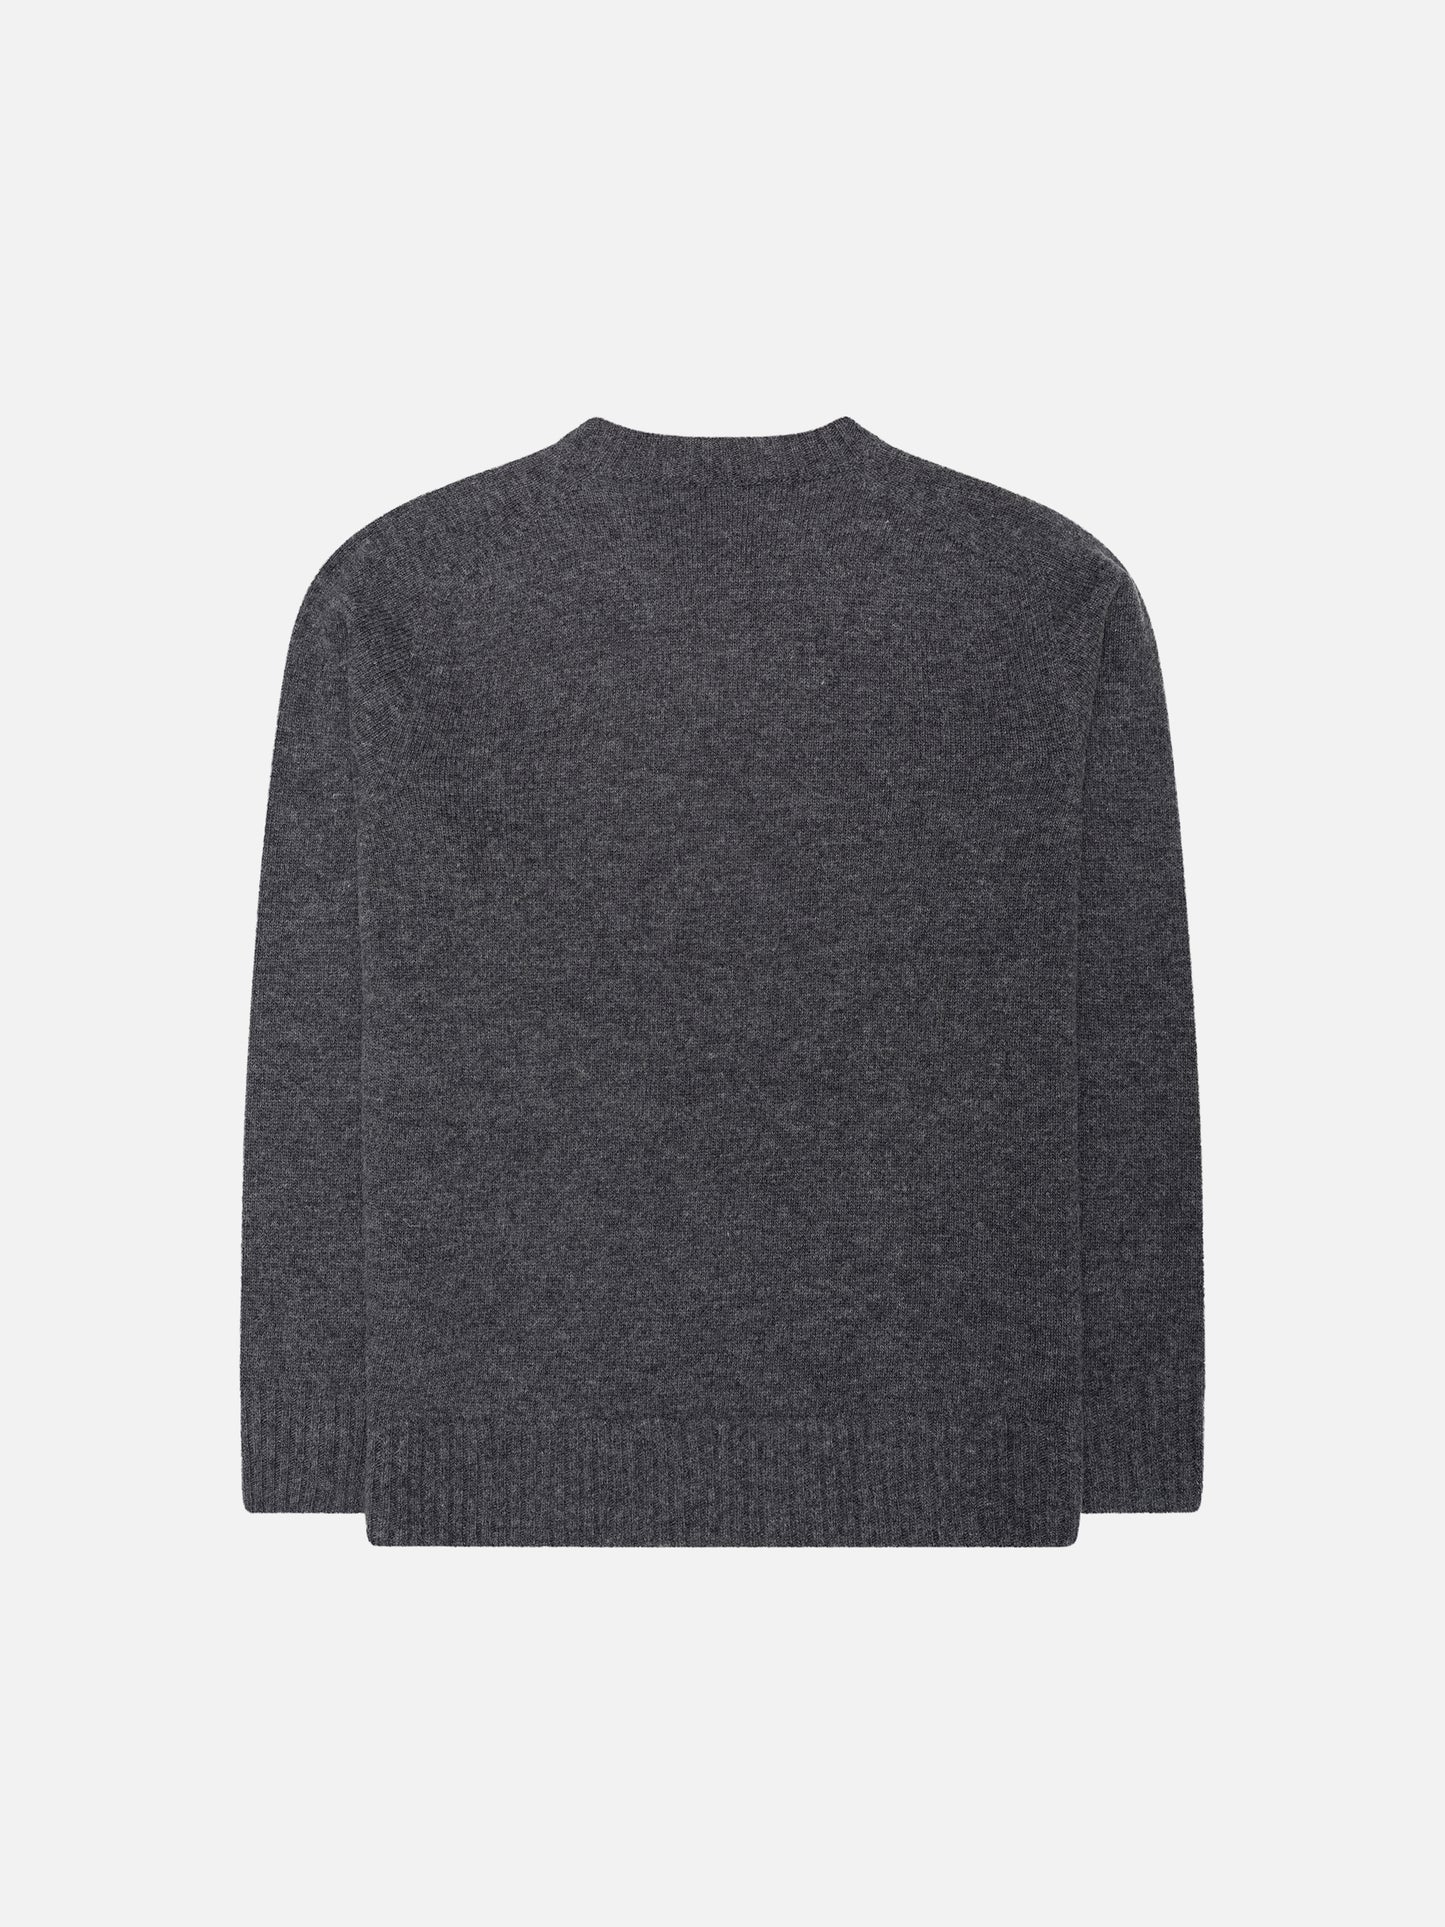 Charcoal Knitted Crewneck Sweater - Oscar Hunt